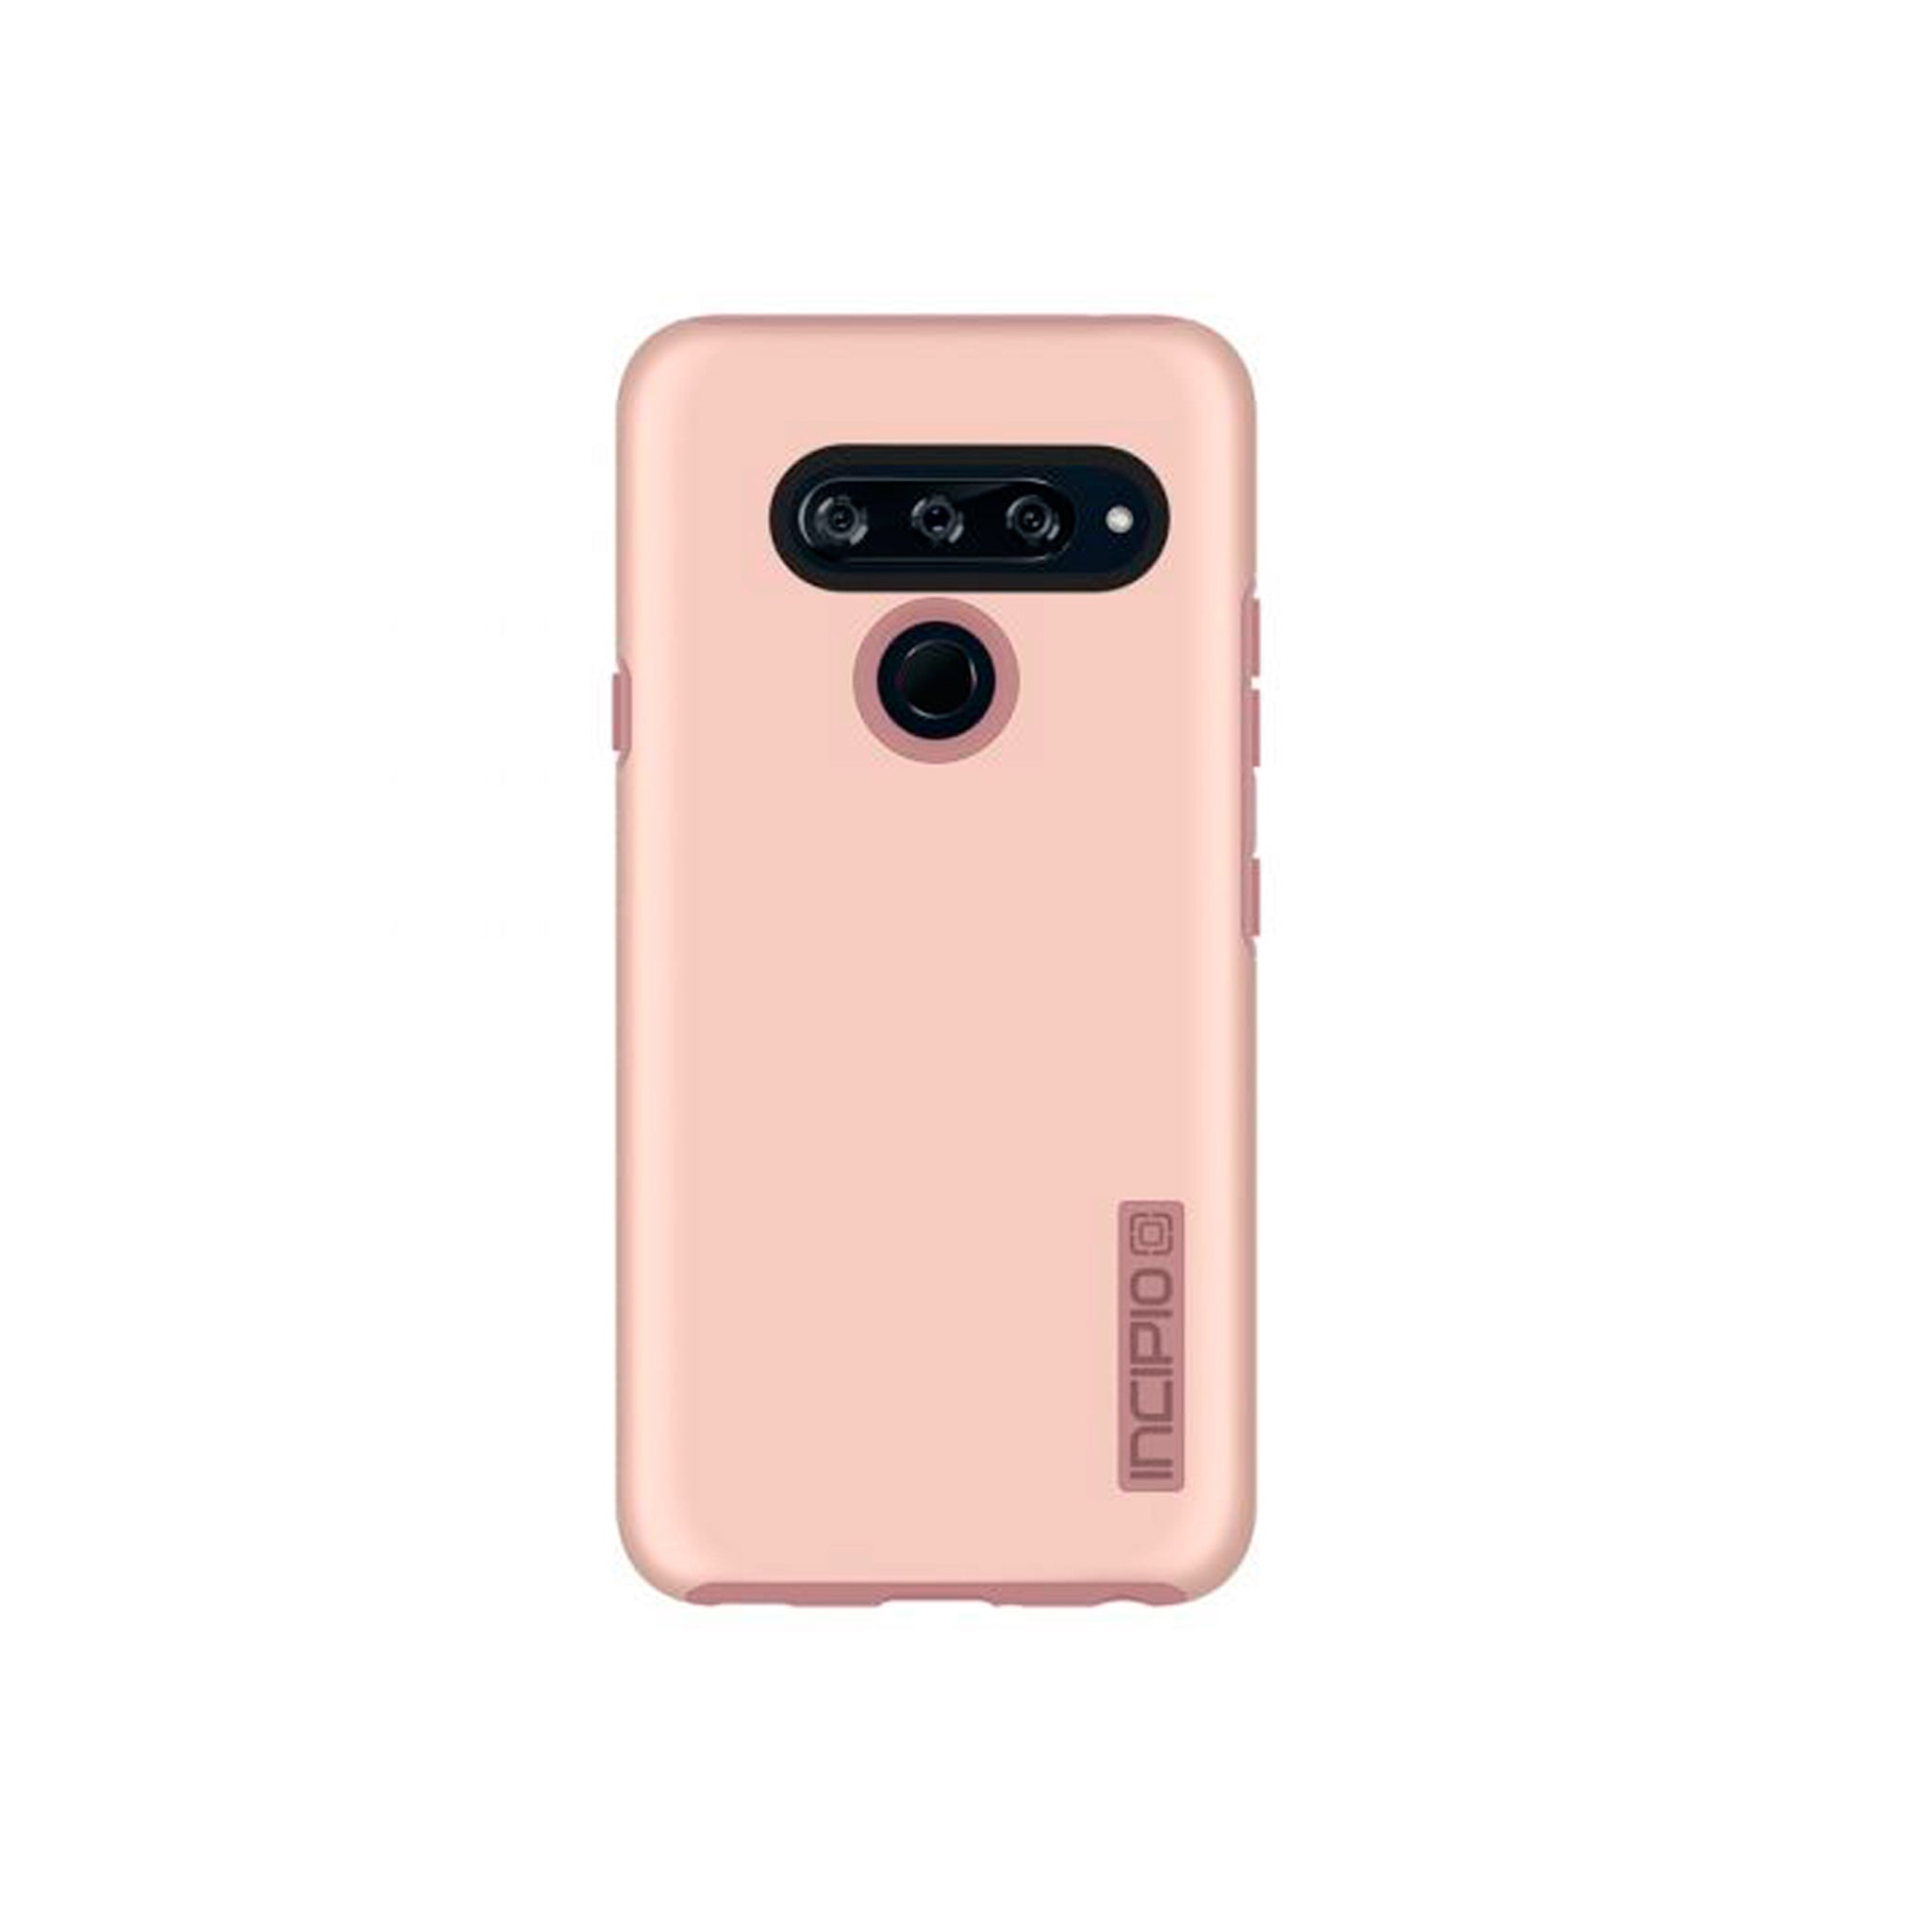 Incipio - DualPro Case For LG V40 Thinq - Iridescent Rose Gold And Pink